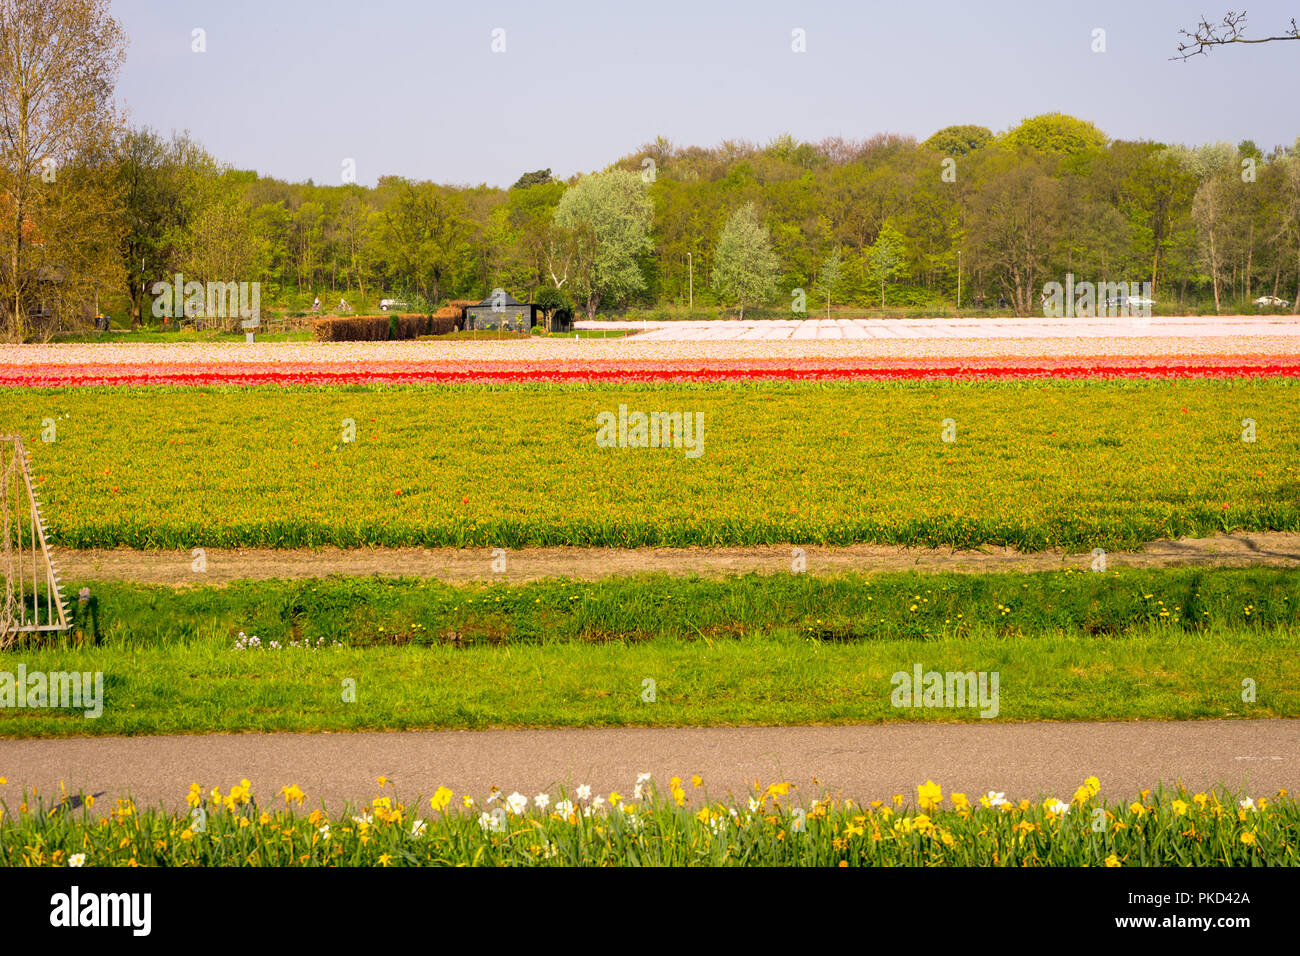 Netherlands,Lisse,Europe, a plane sitting on top of a grass covered field Stock Photo